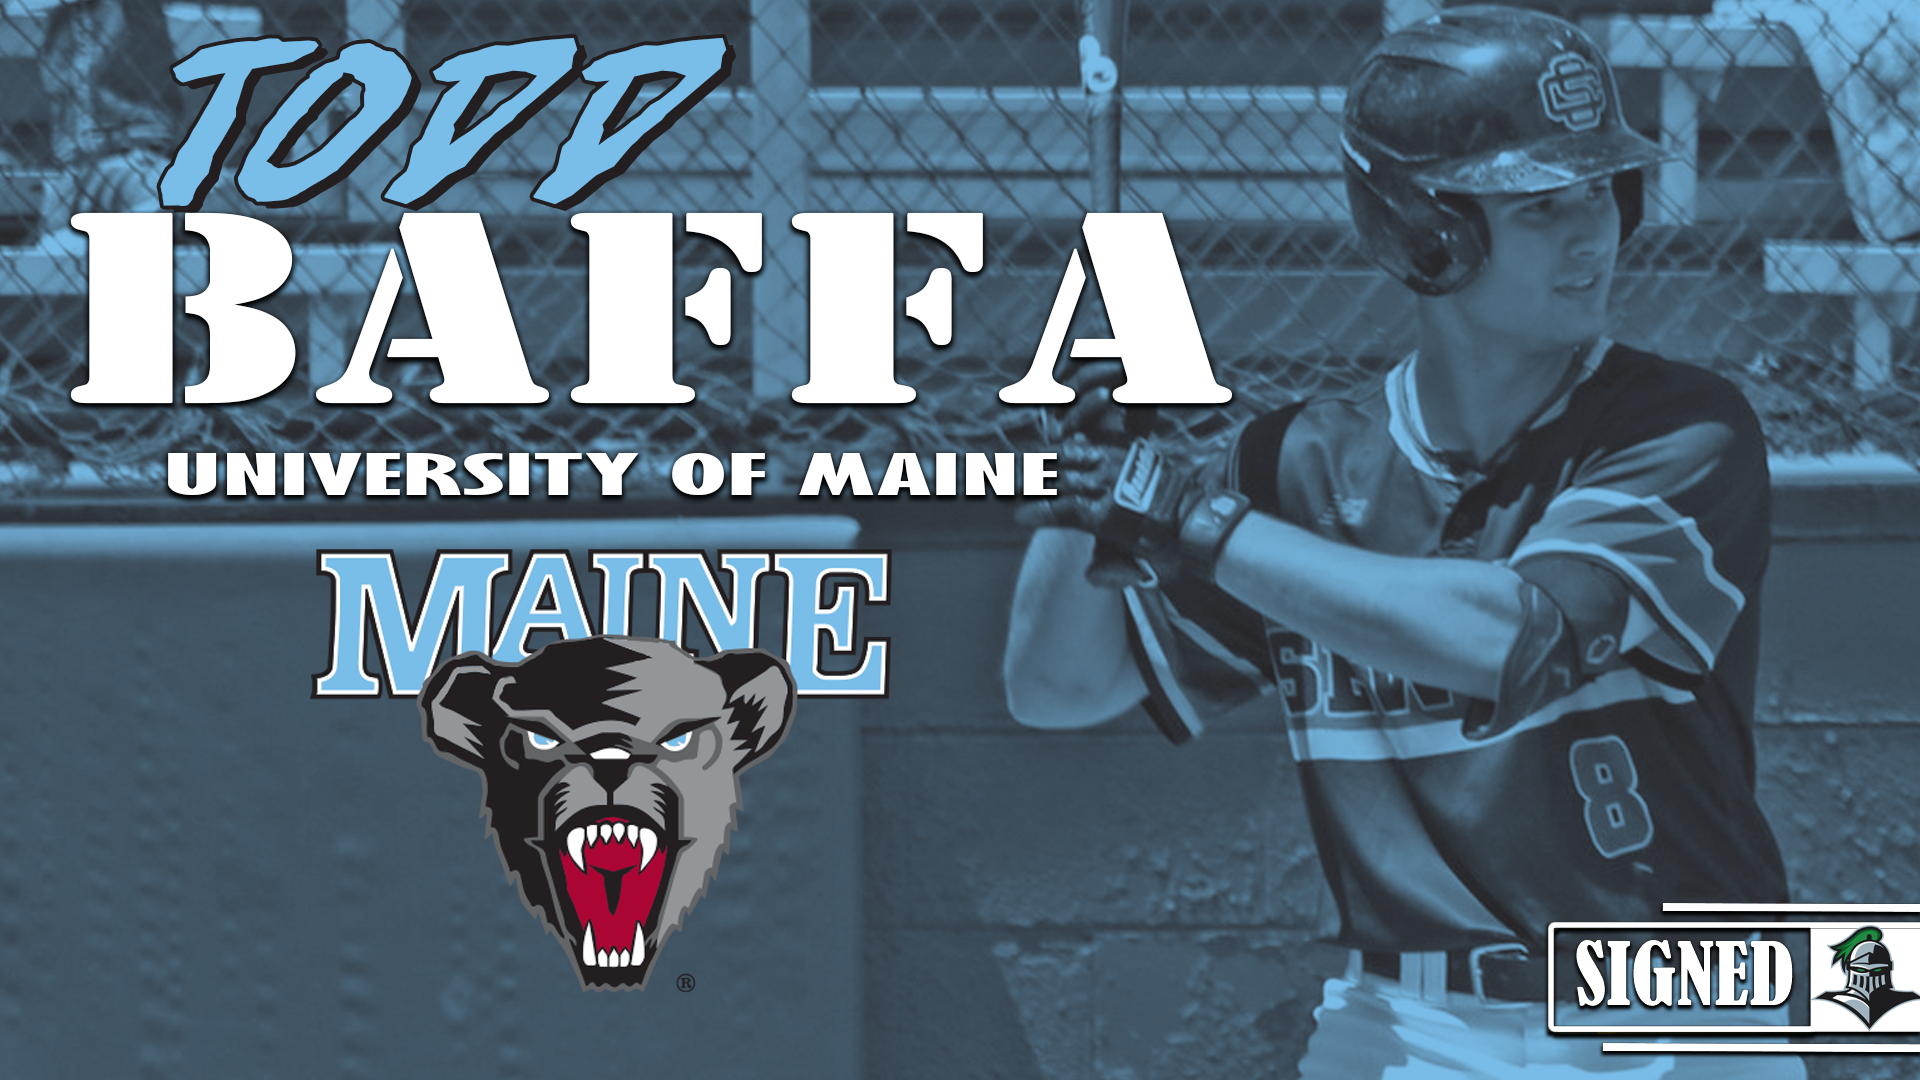 Baffa Becomes Black Bear After Signing with Maine